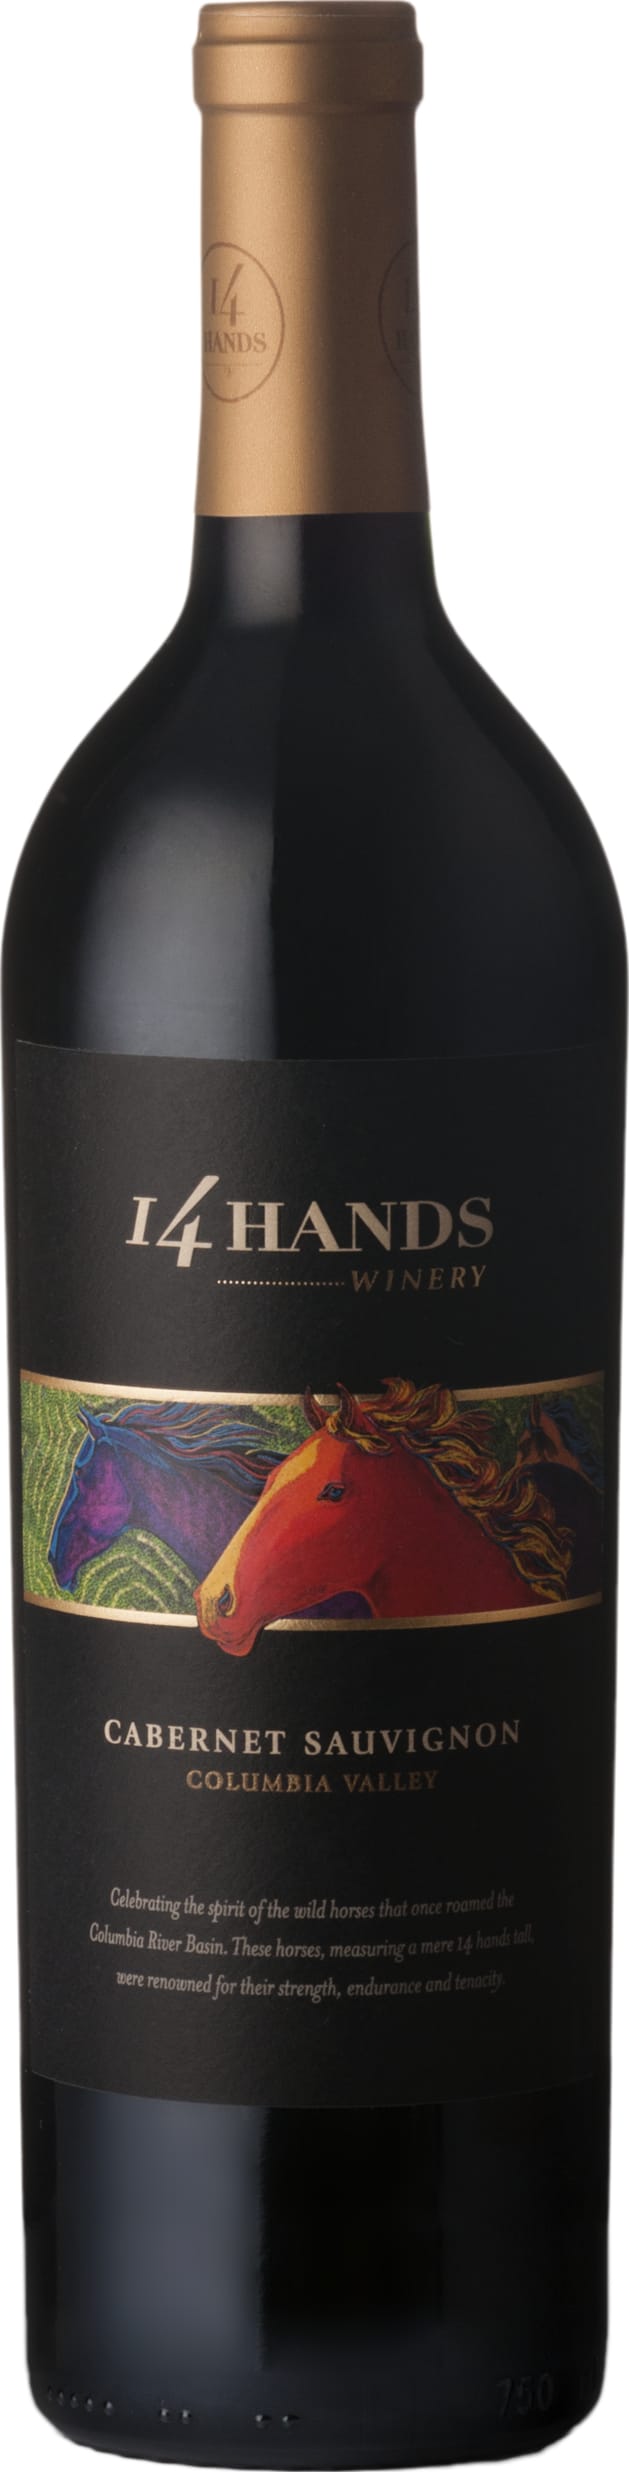 14 Hands Cabernet Sauvignon 2018 75cl - Buy 14 Hands Wines from GREAT WINES DIRECT wine shop